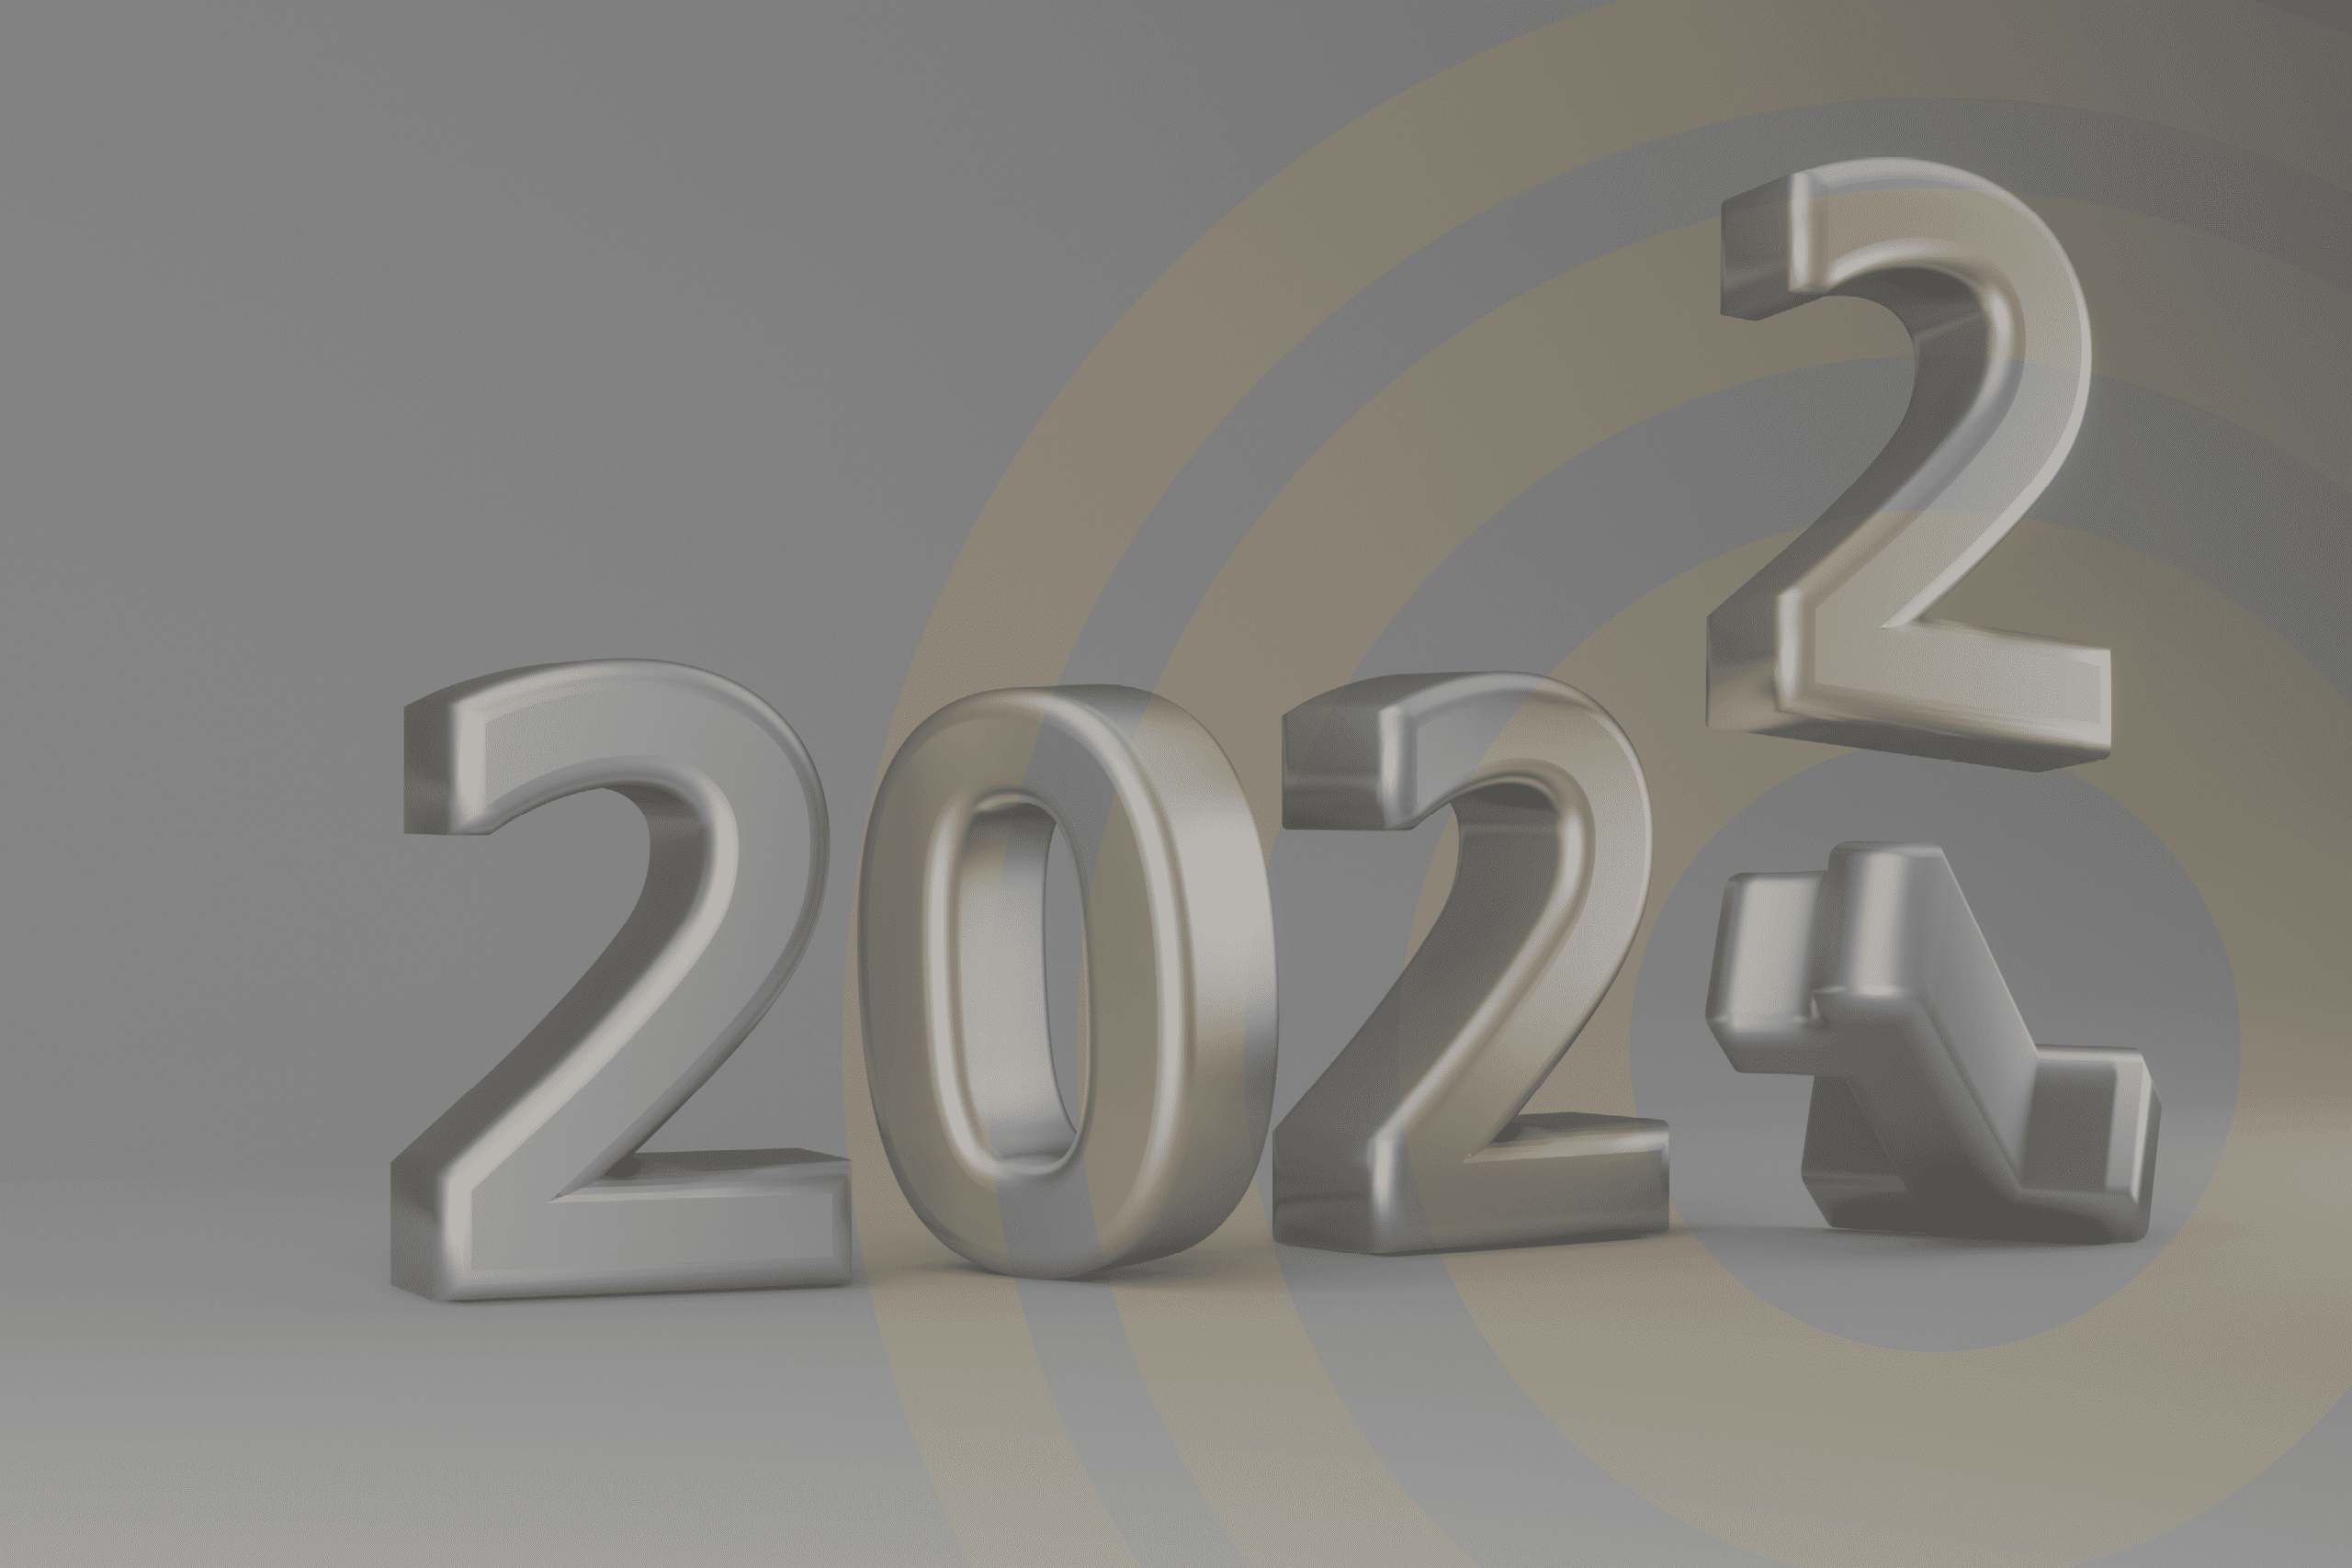 2021…A year most of us would like to forget, or not really?